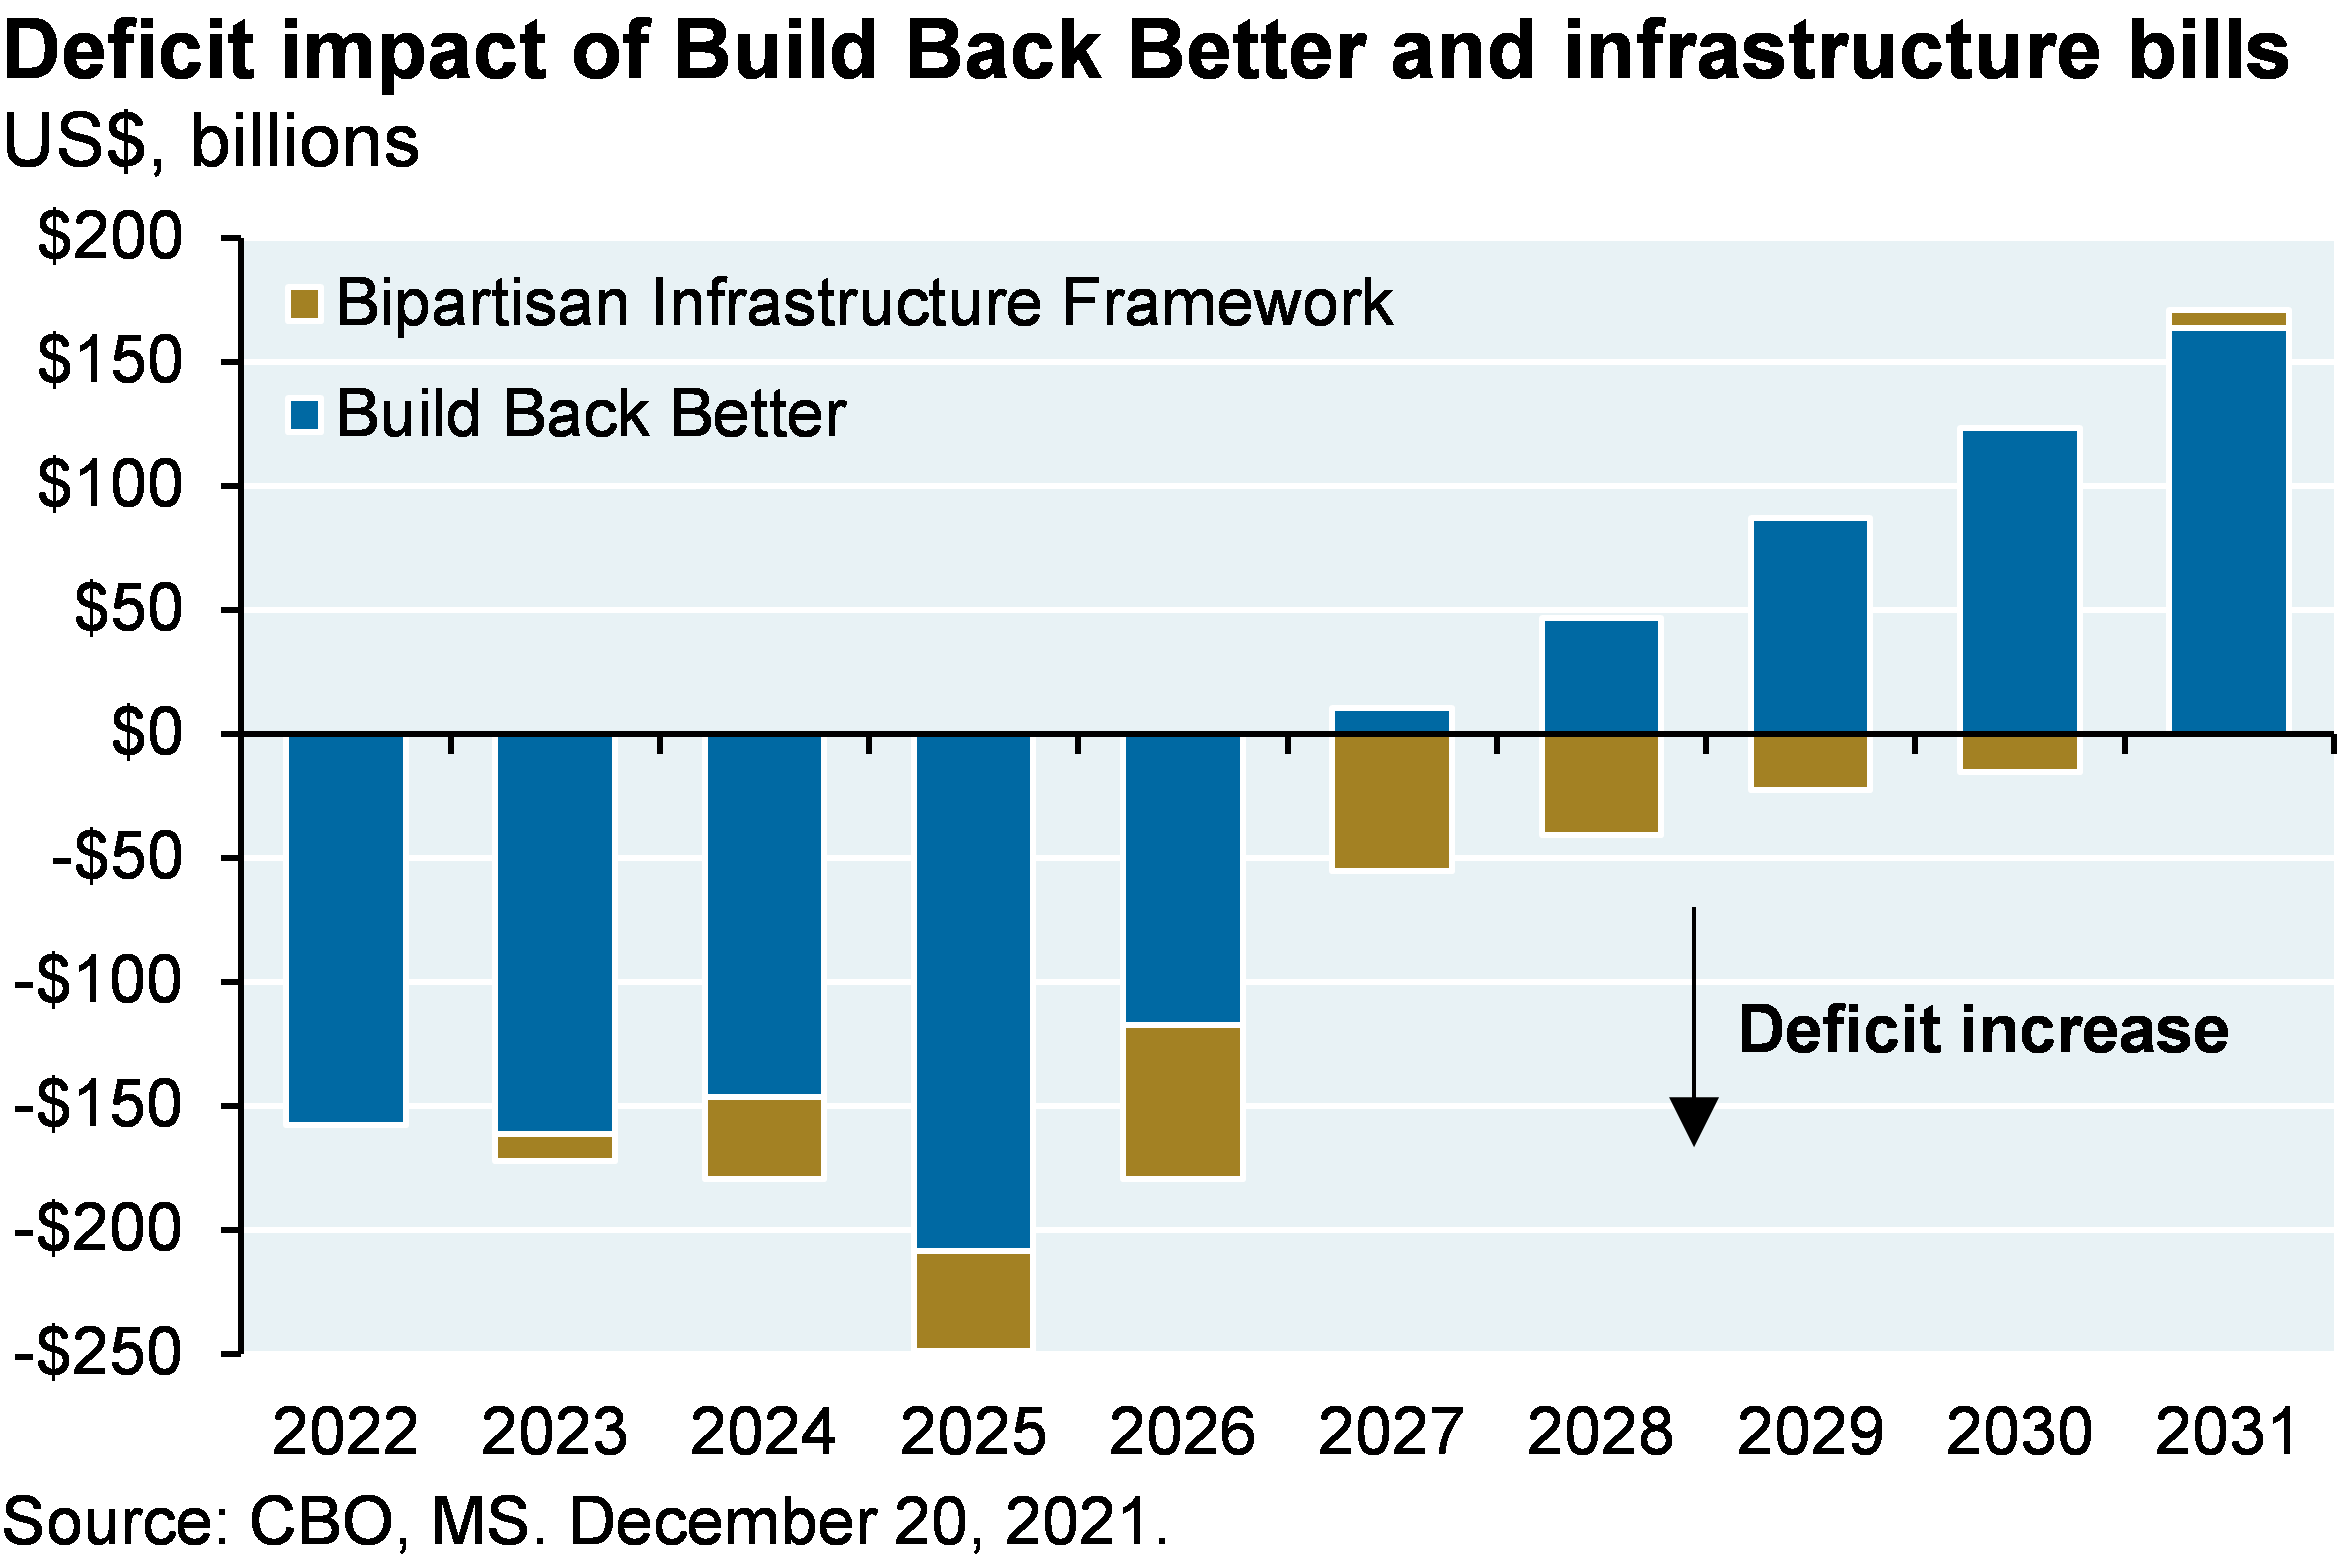 Bar chart shows the deficit impact of the Build Back Better and infrastructure bills shown in billions of dollars. Chart shows that in 2022 through 2016 both the Bipartisan Infrastructure Framework and the Build Back Better plan would increase the deficit. From 2027 through 2030 the Build Back Better plan decreases the deficit but the bipartisan infrastructure framework would increase the deficit. In 2031, both bills would decrease the deficit by around $150 billion.